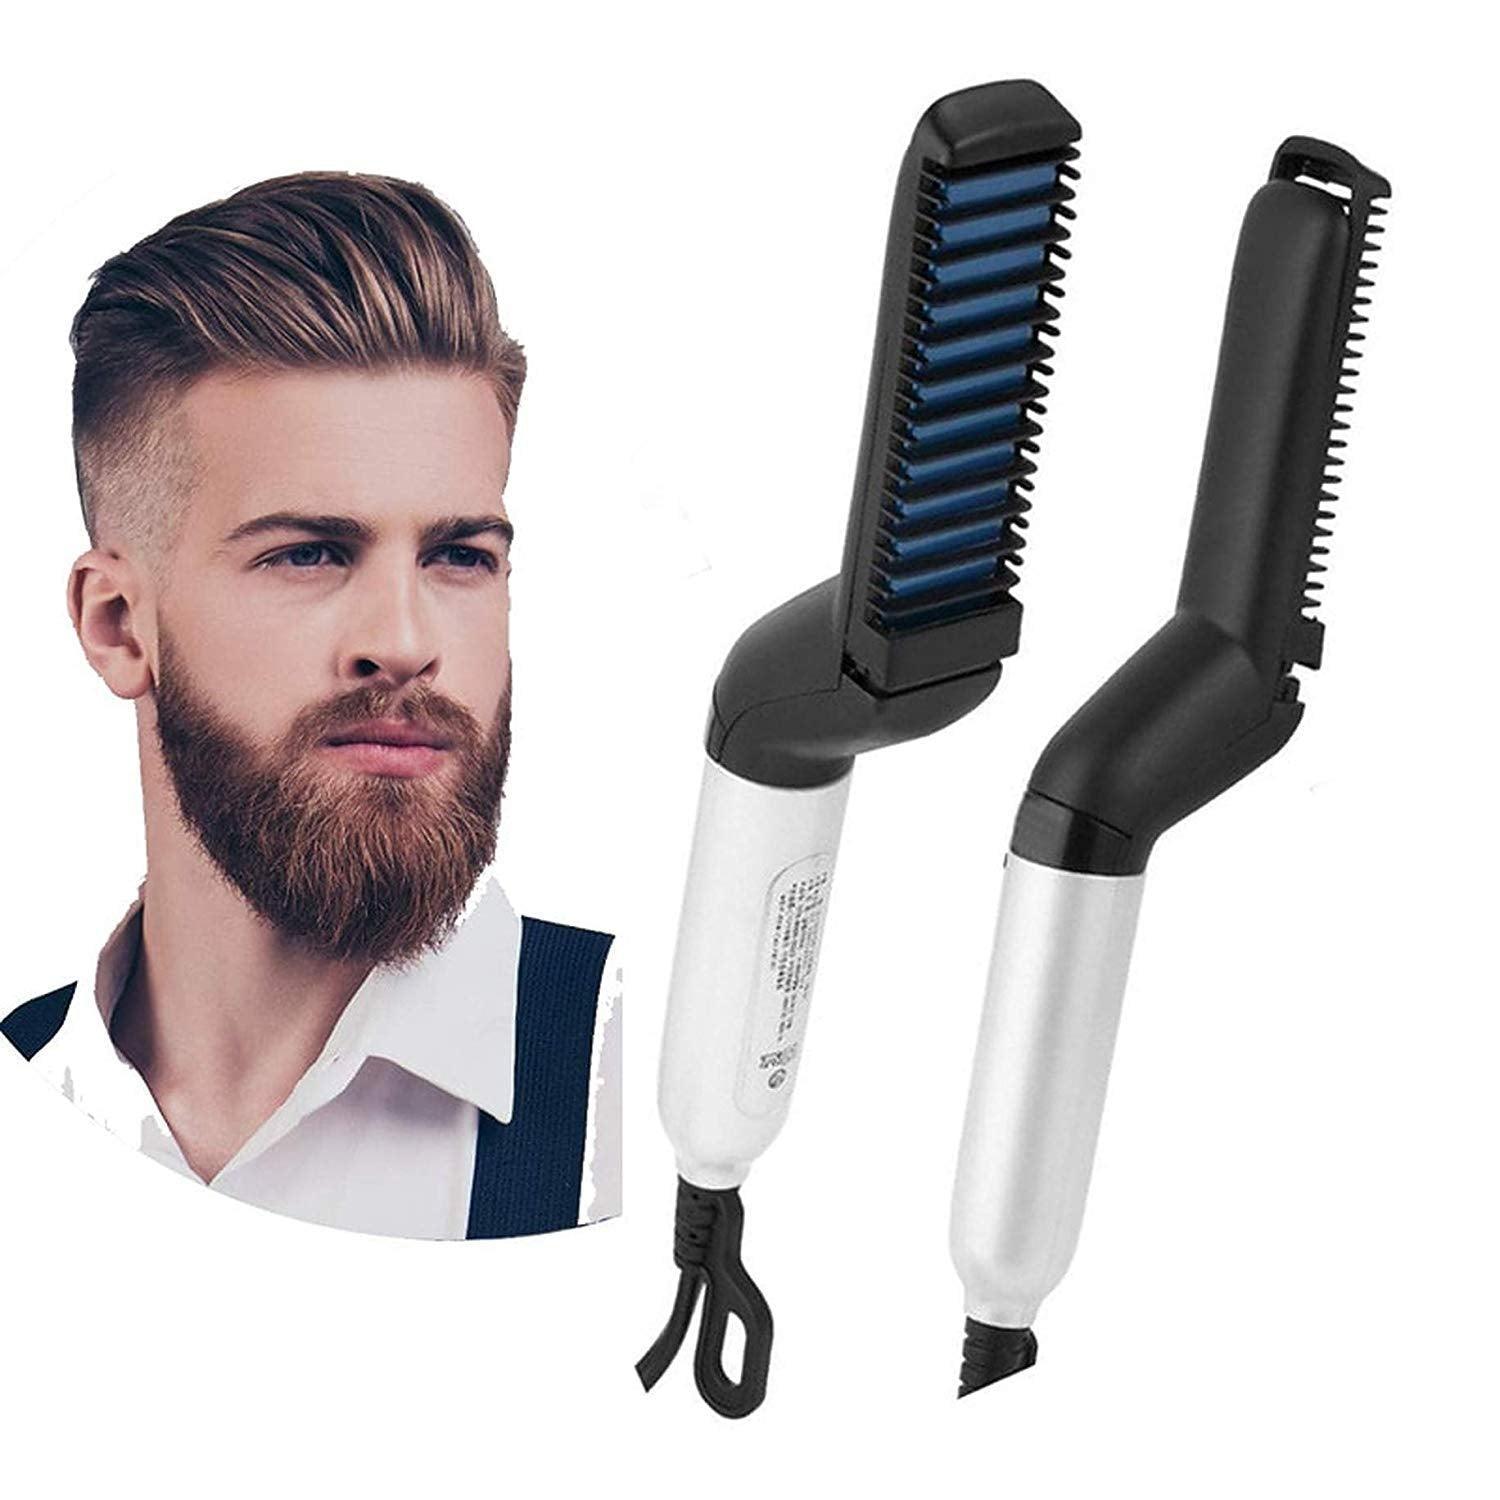 2 in 1 Beard And Hair Straightener Comb - TruVeli